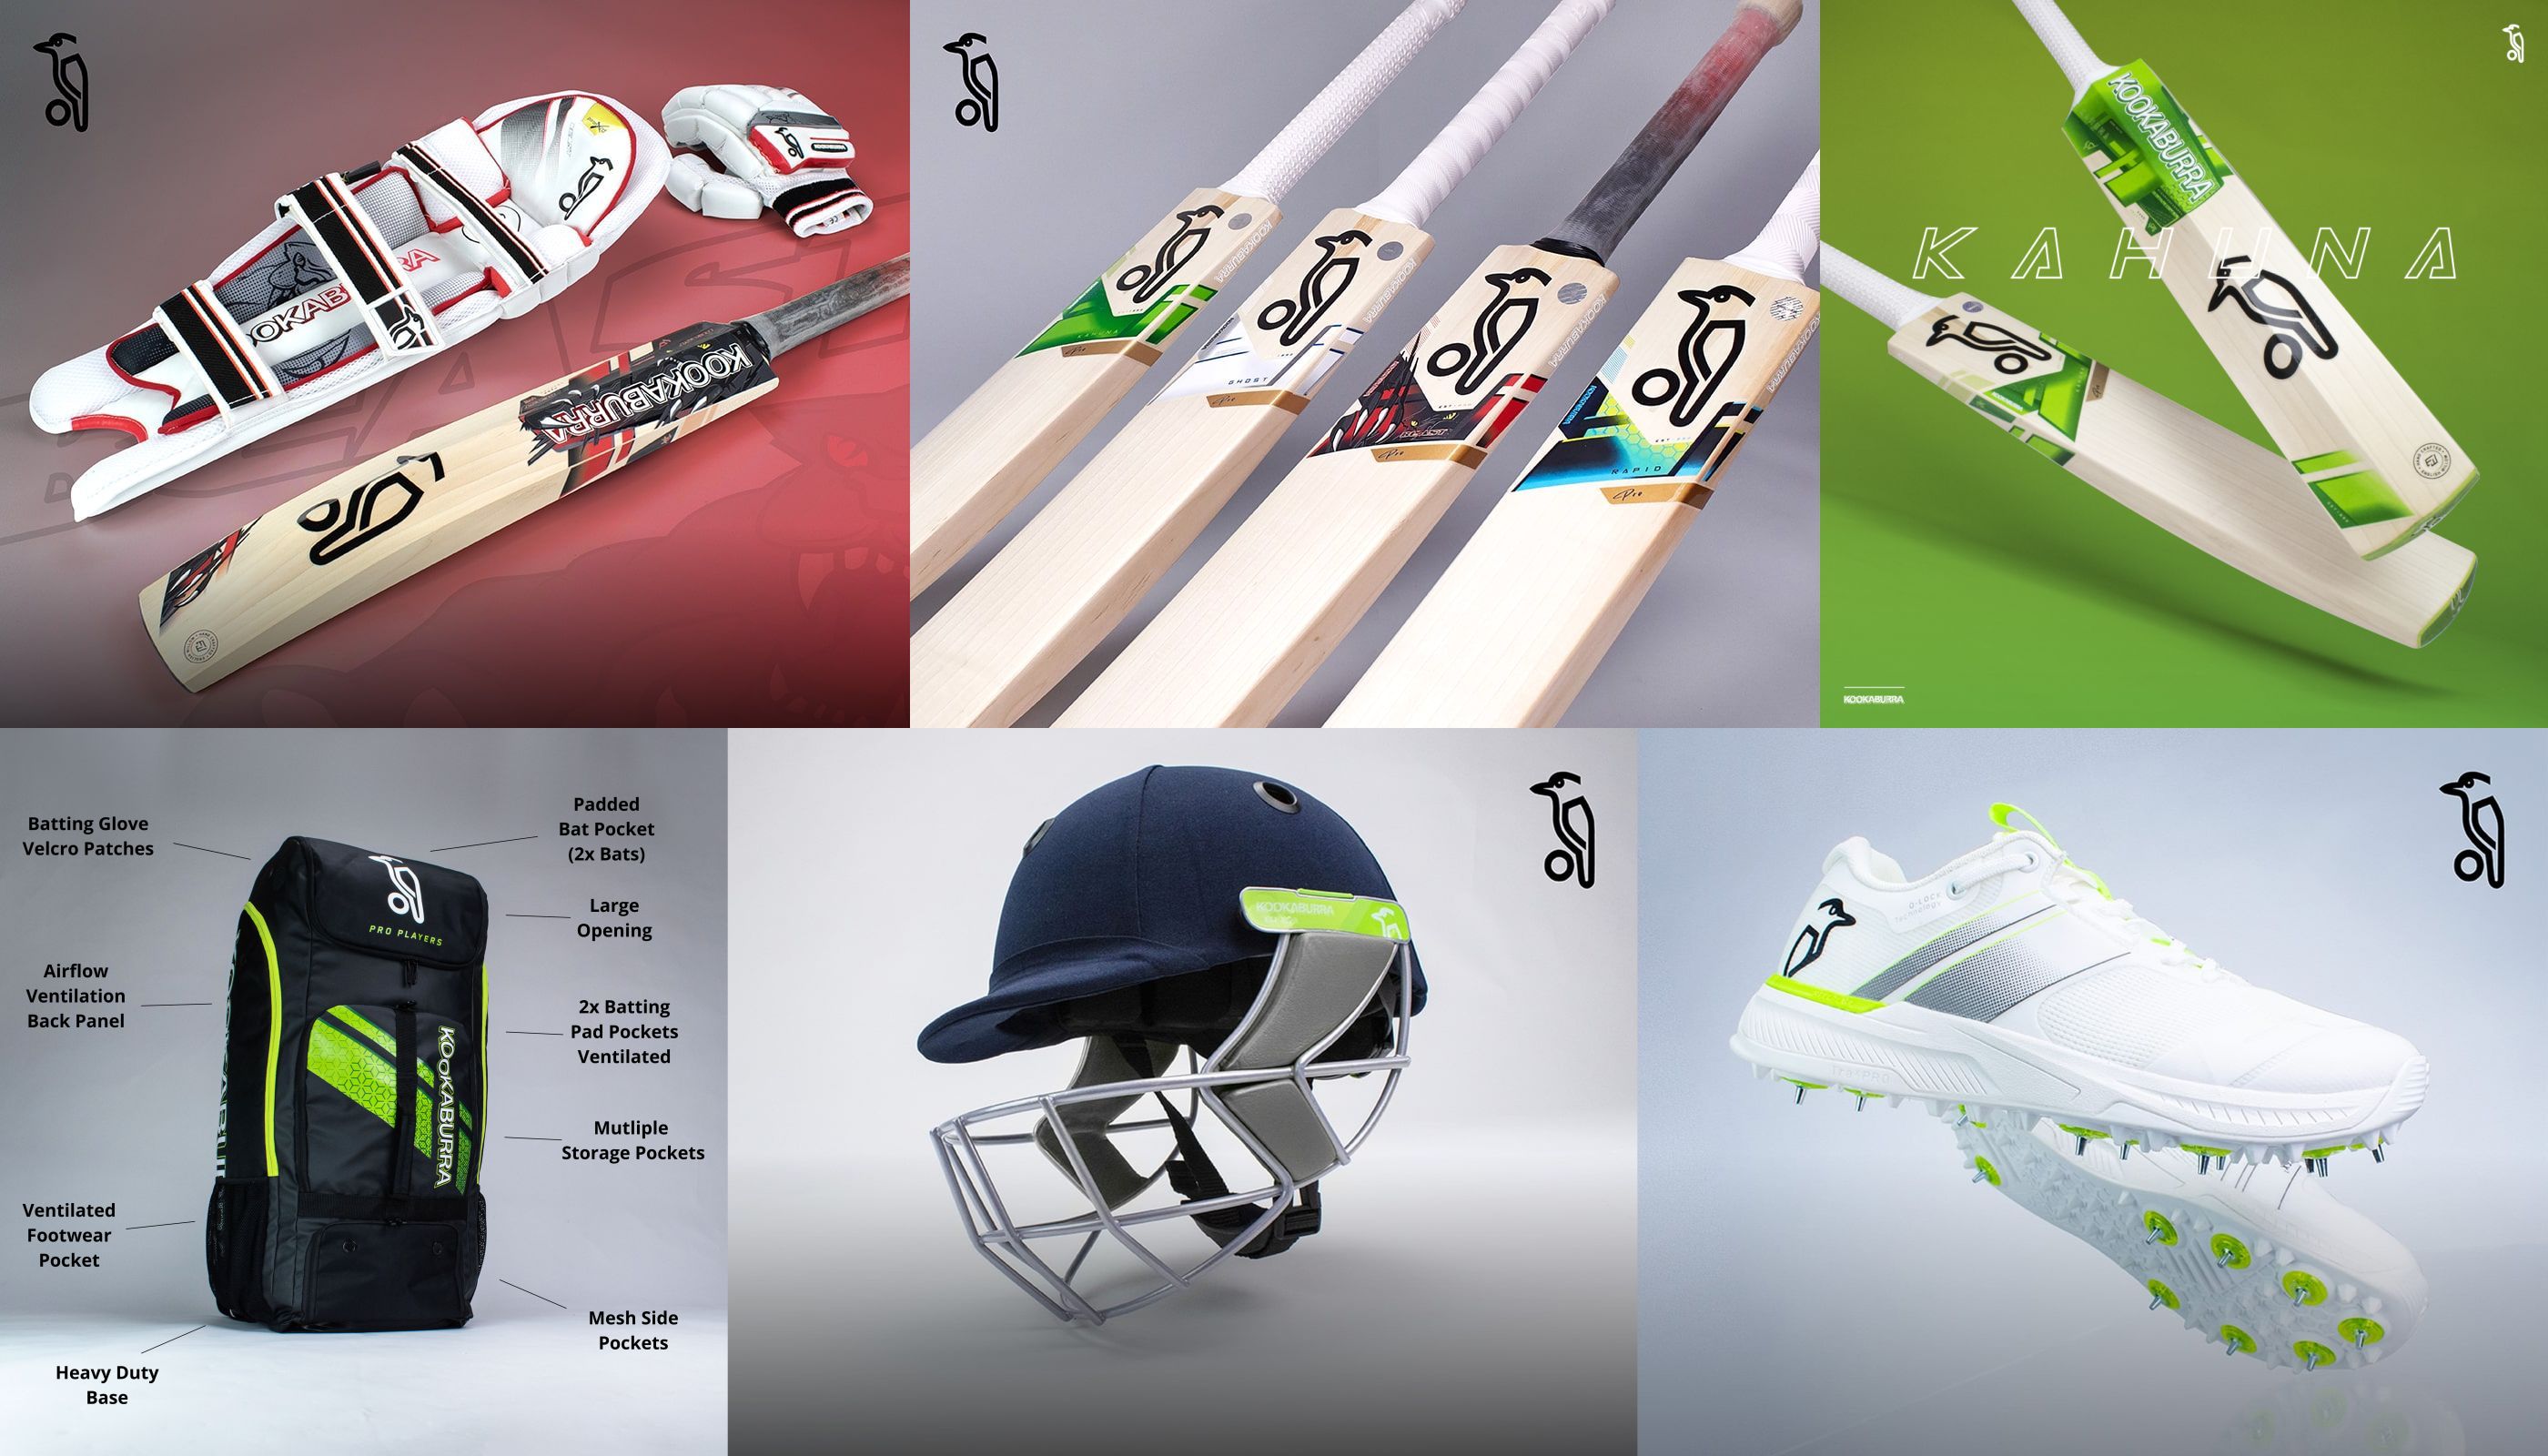 Sale Offers on cricket bats, gloves, pads, kits, and balls